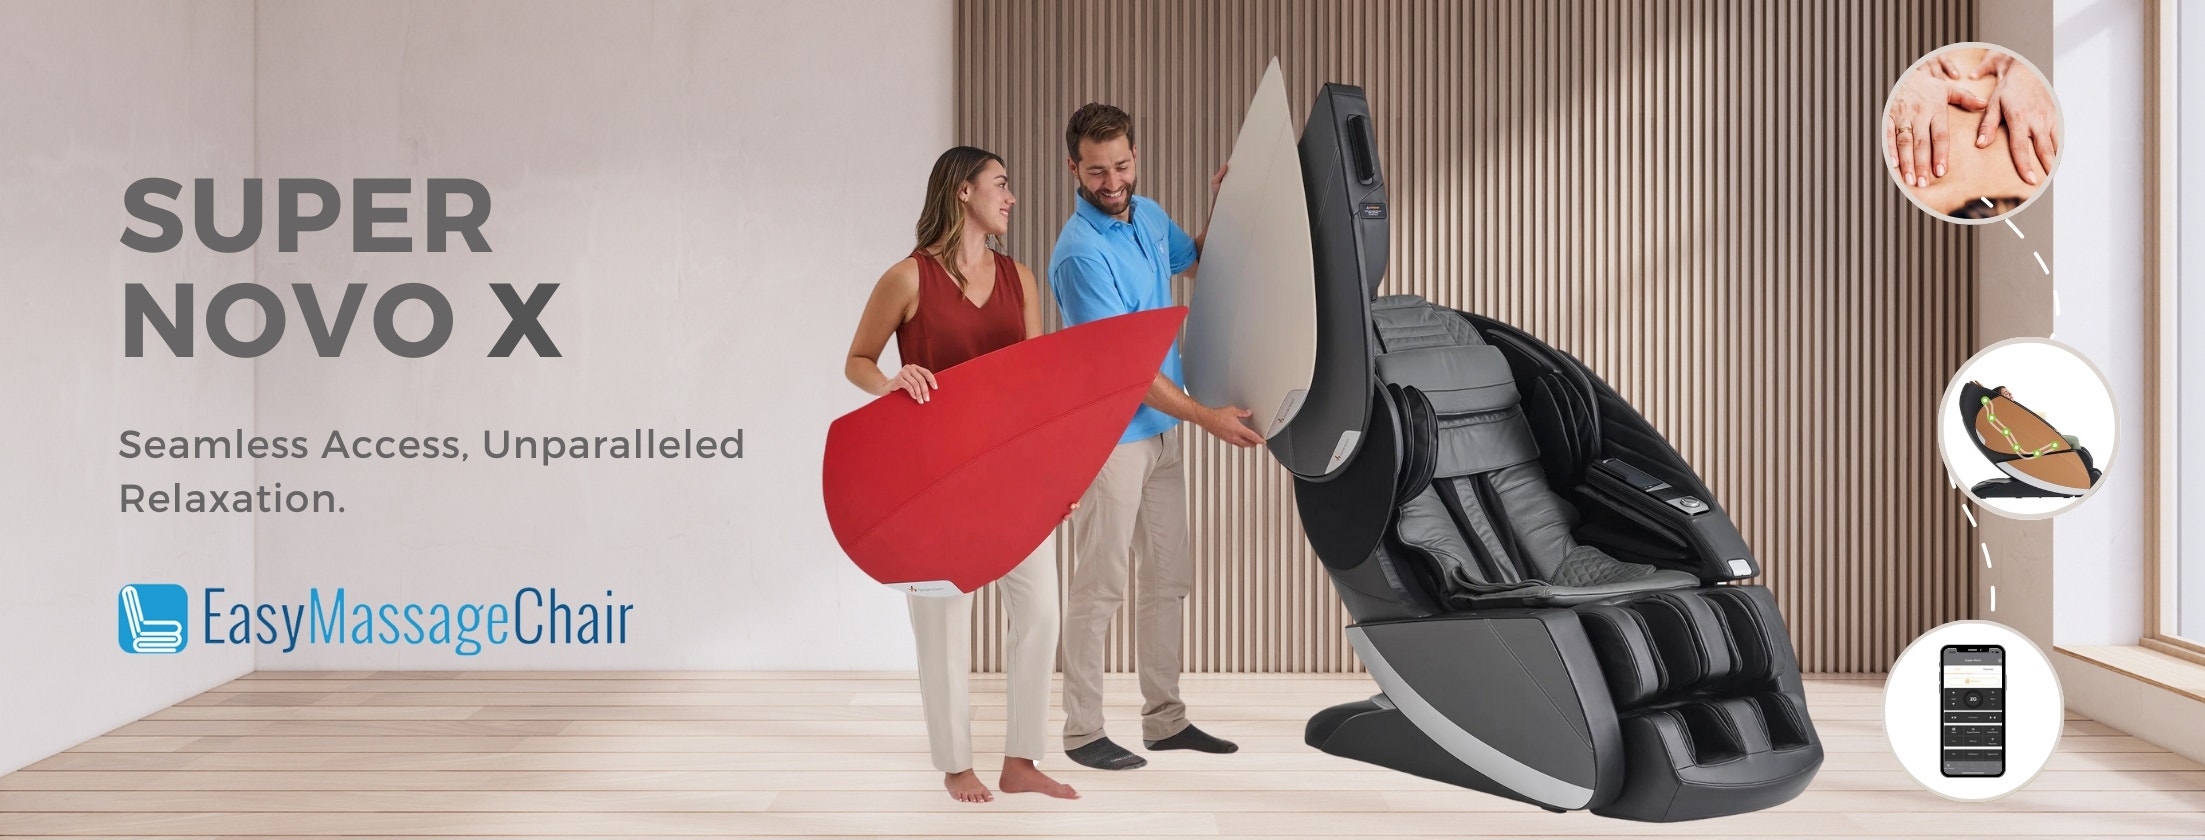 Super Novo X Massage Chair: A Culmination of Techniques and the Latest Massage Technologies